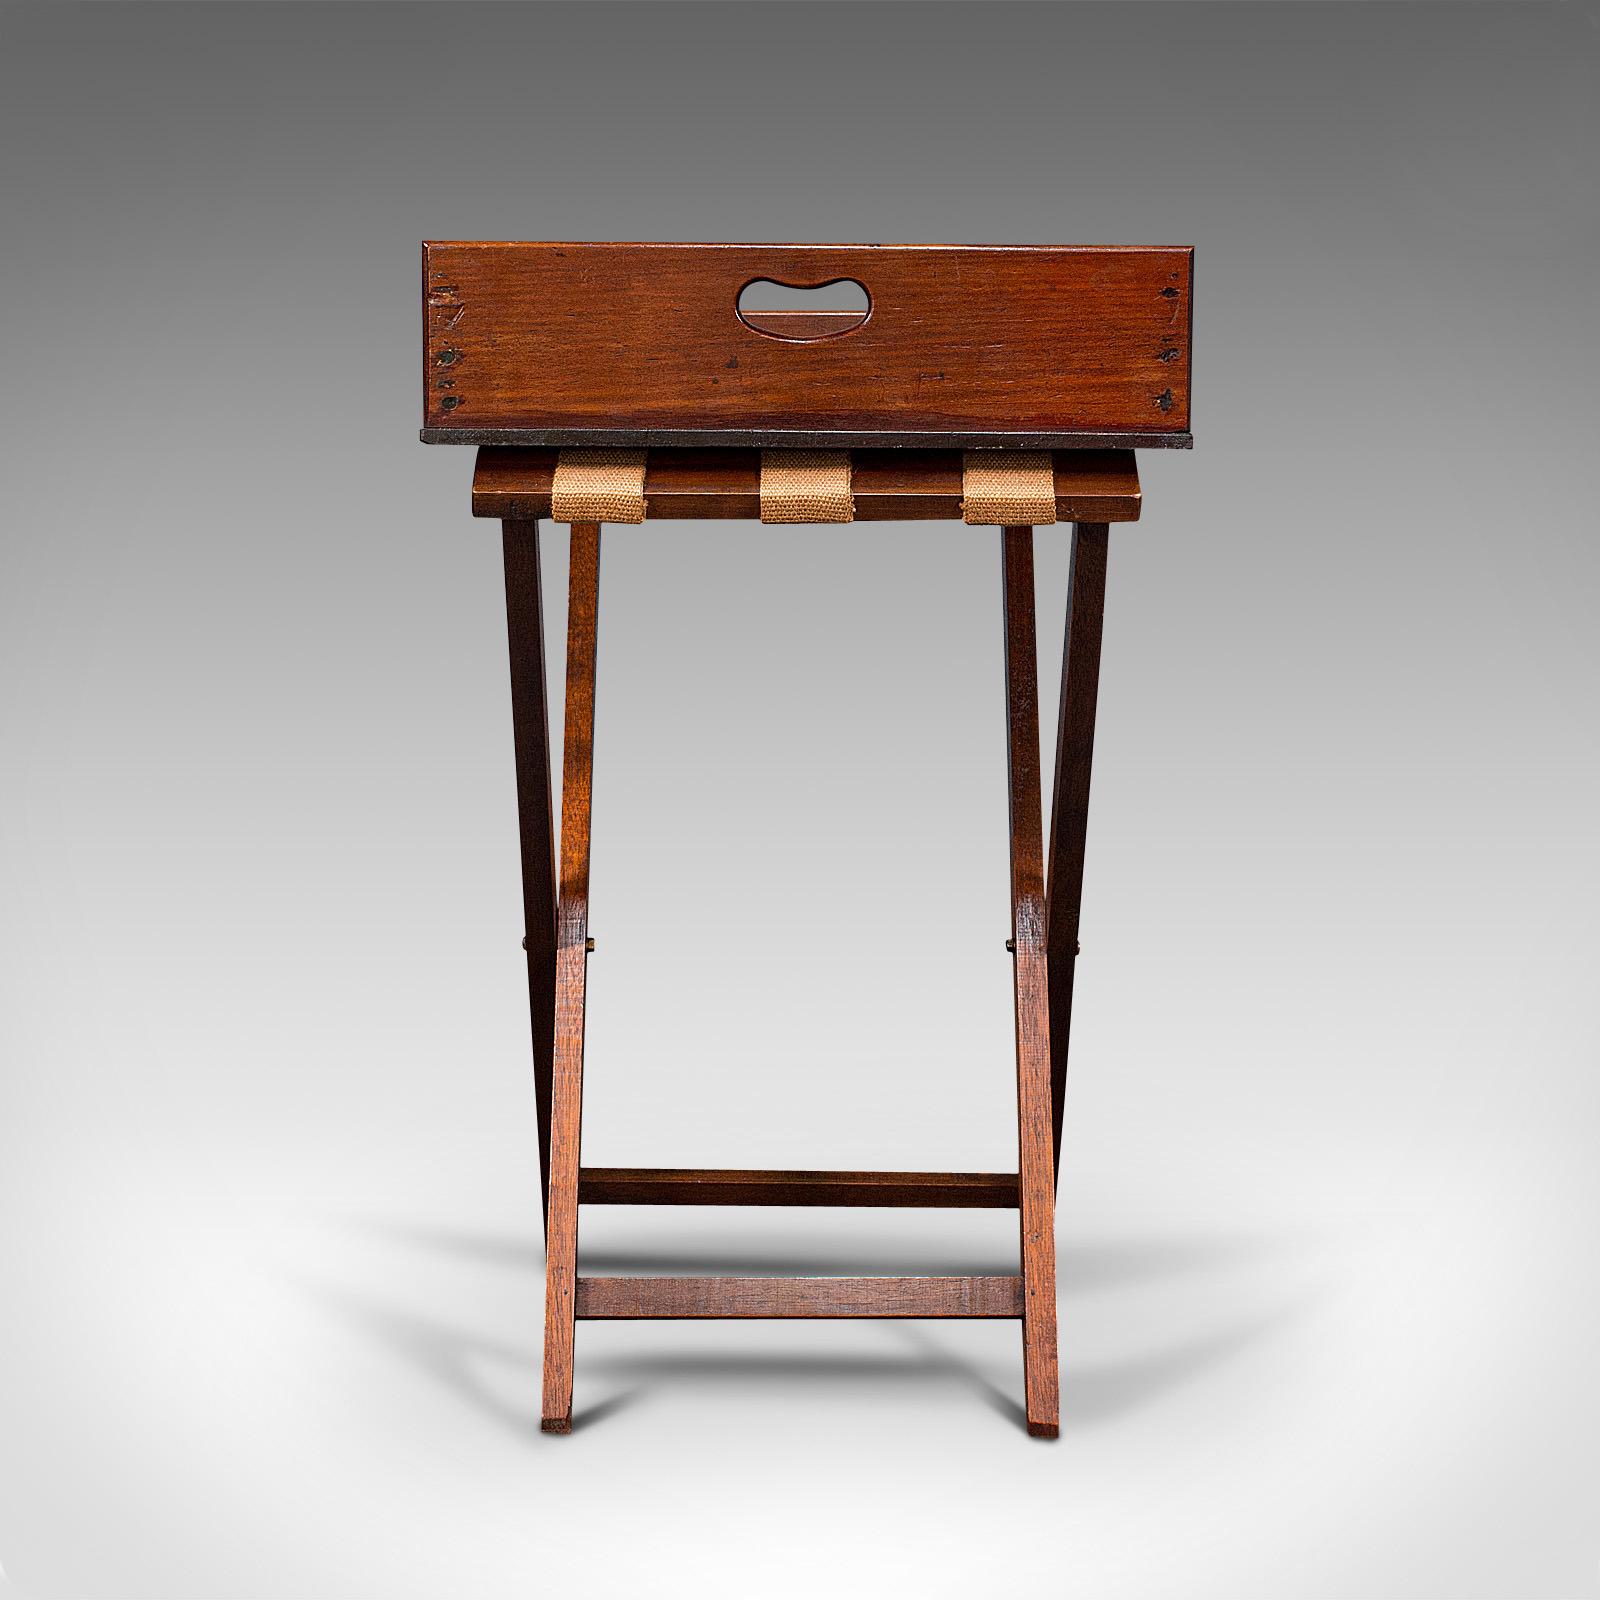 British Antique Butler's Stand, English, Mahogany, Serving Tray, Rest, Victorian, C.1900